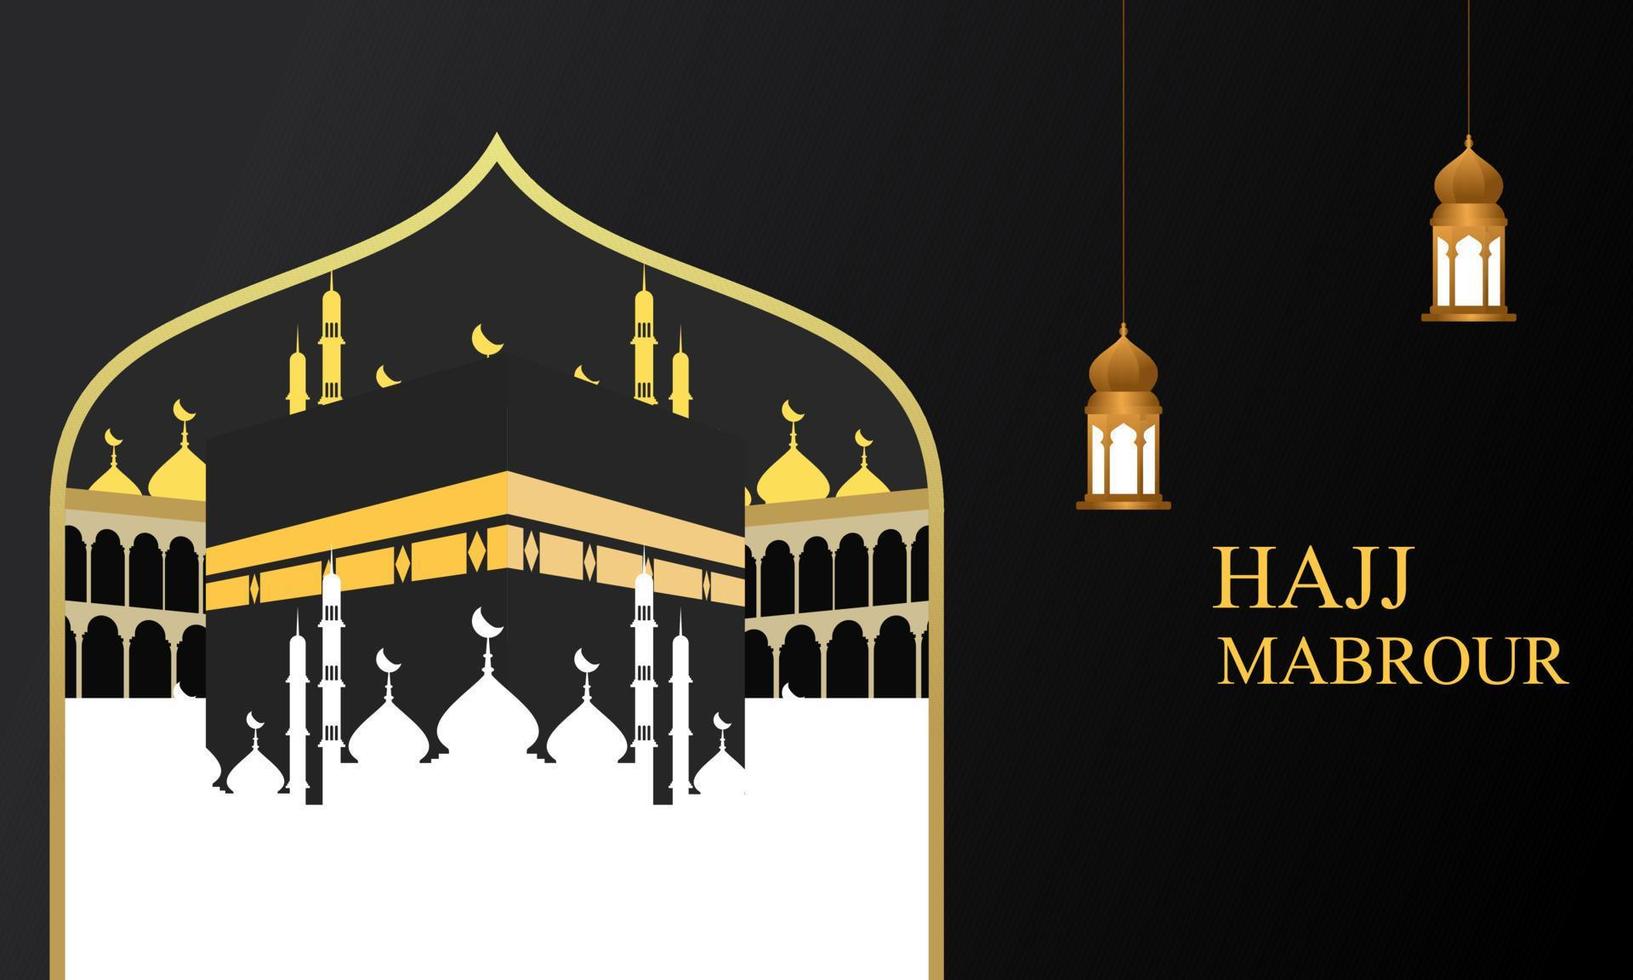 Islamic pilgrimage background, hajj and umrah concept with kaaba and nabawi mosque. vector